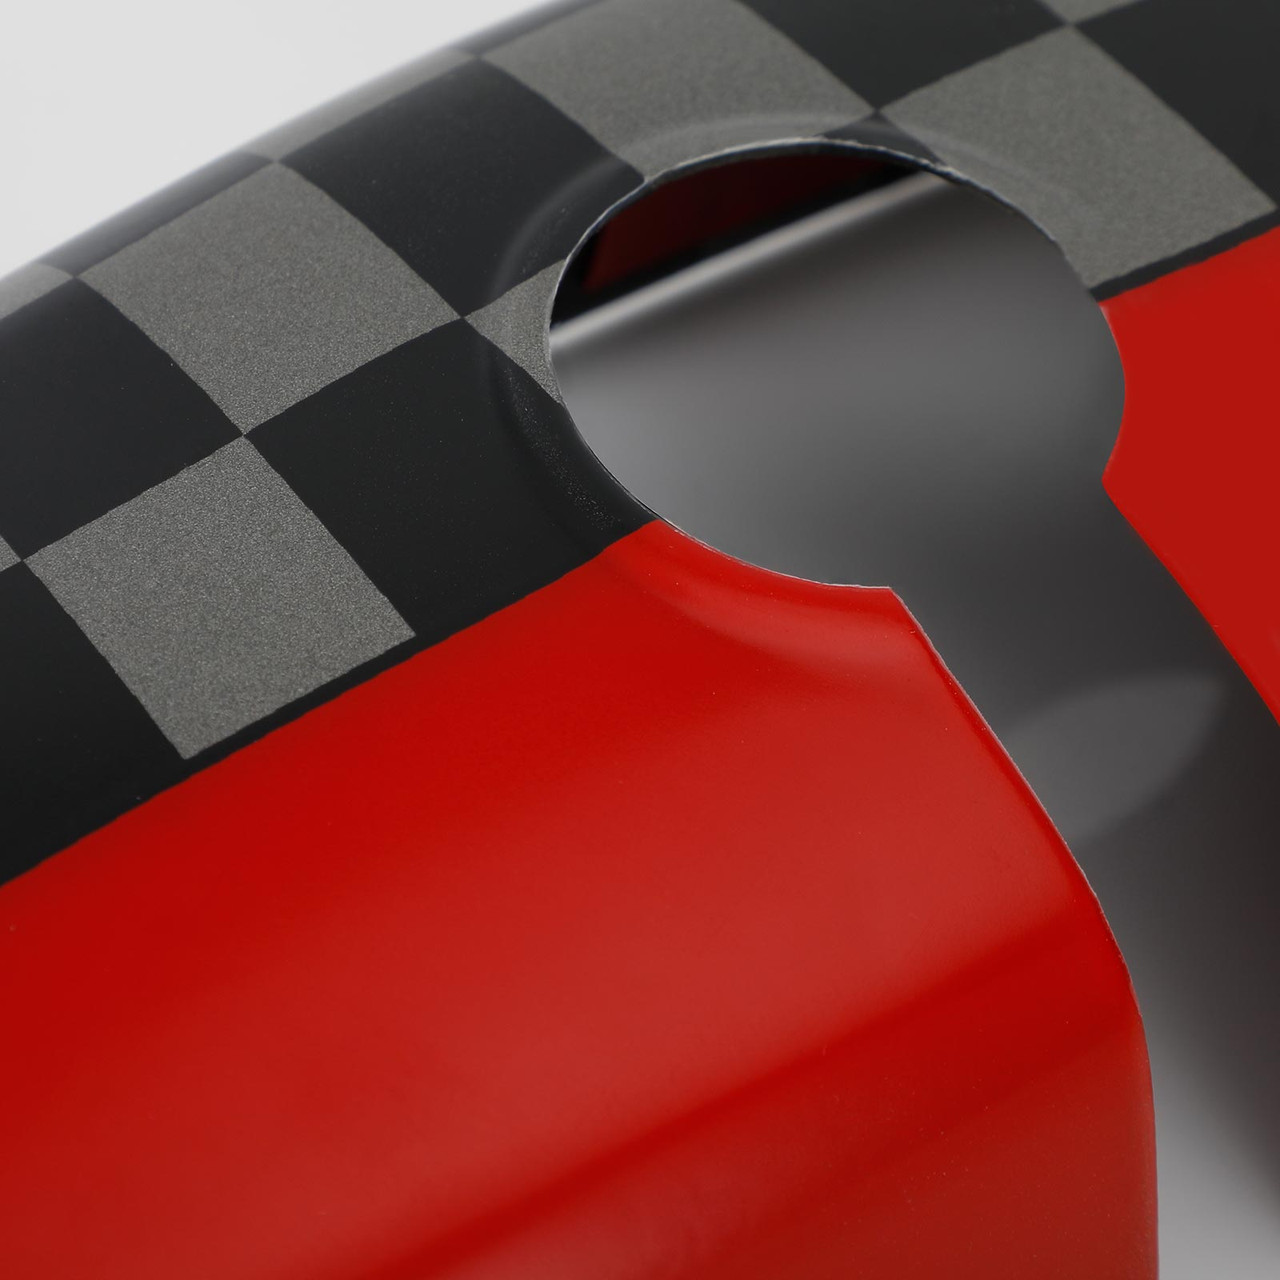 Black/Grey Checkered Red Rear View Mirror Cover Fit For BMW MINI Cooper R55 R56 R57